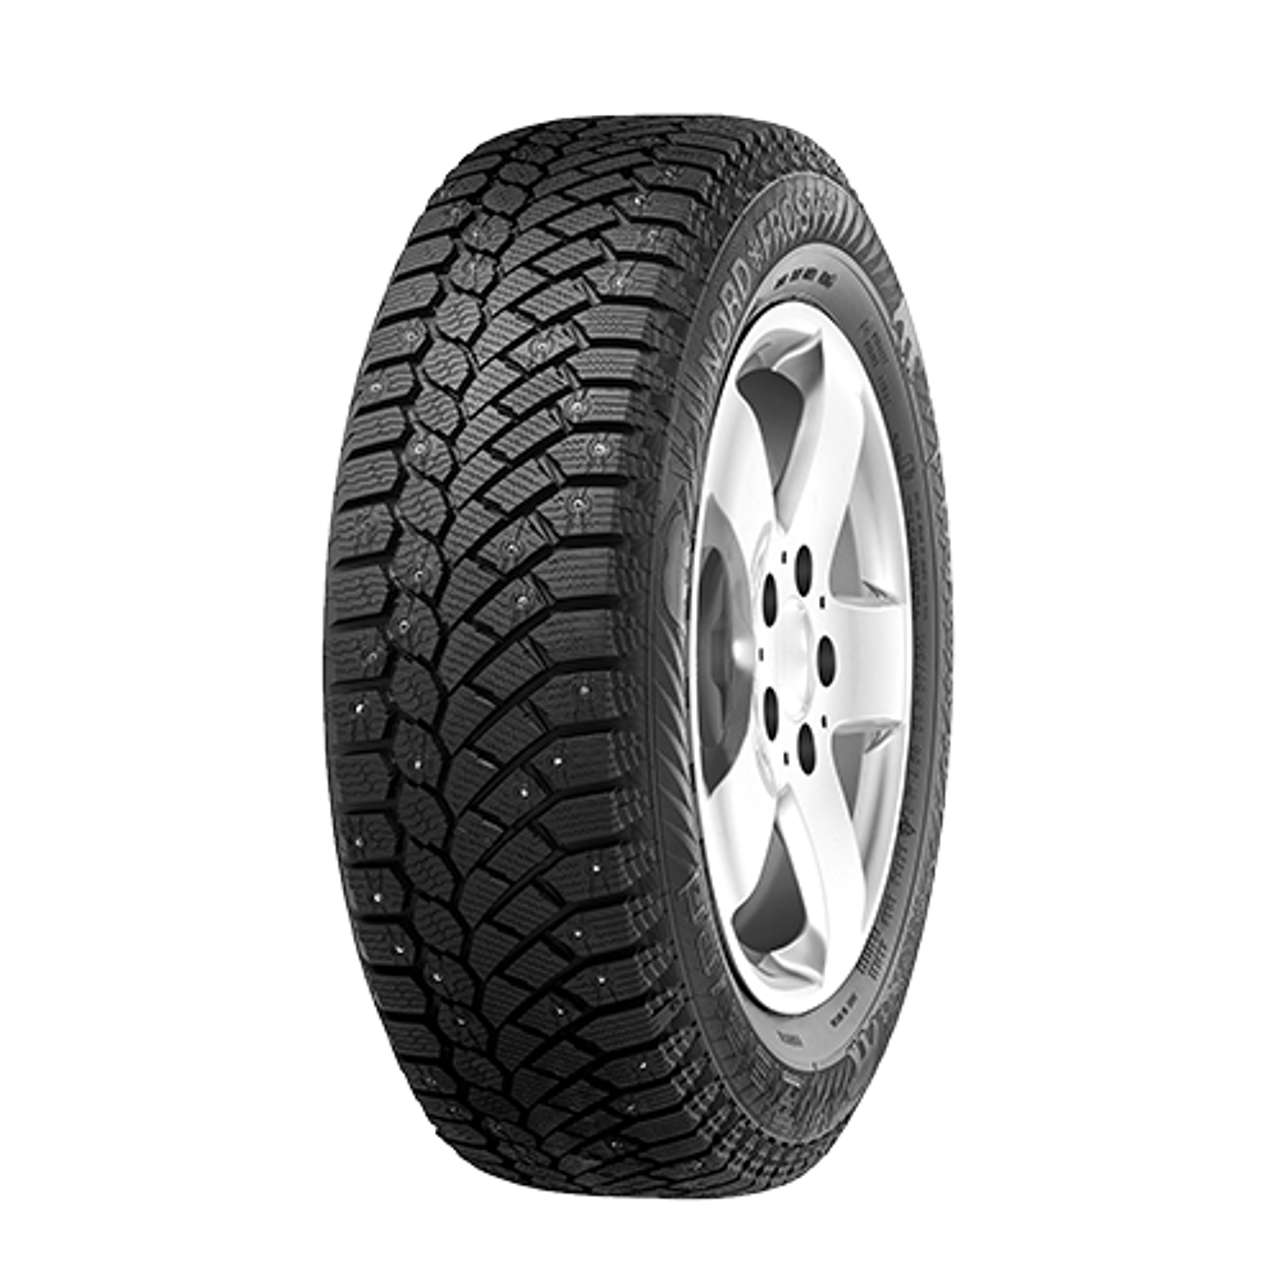 GISLAVED NORD*FROST 200 SUV 235/55R17 103T STUDDABLE FR XL